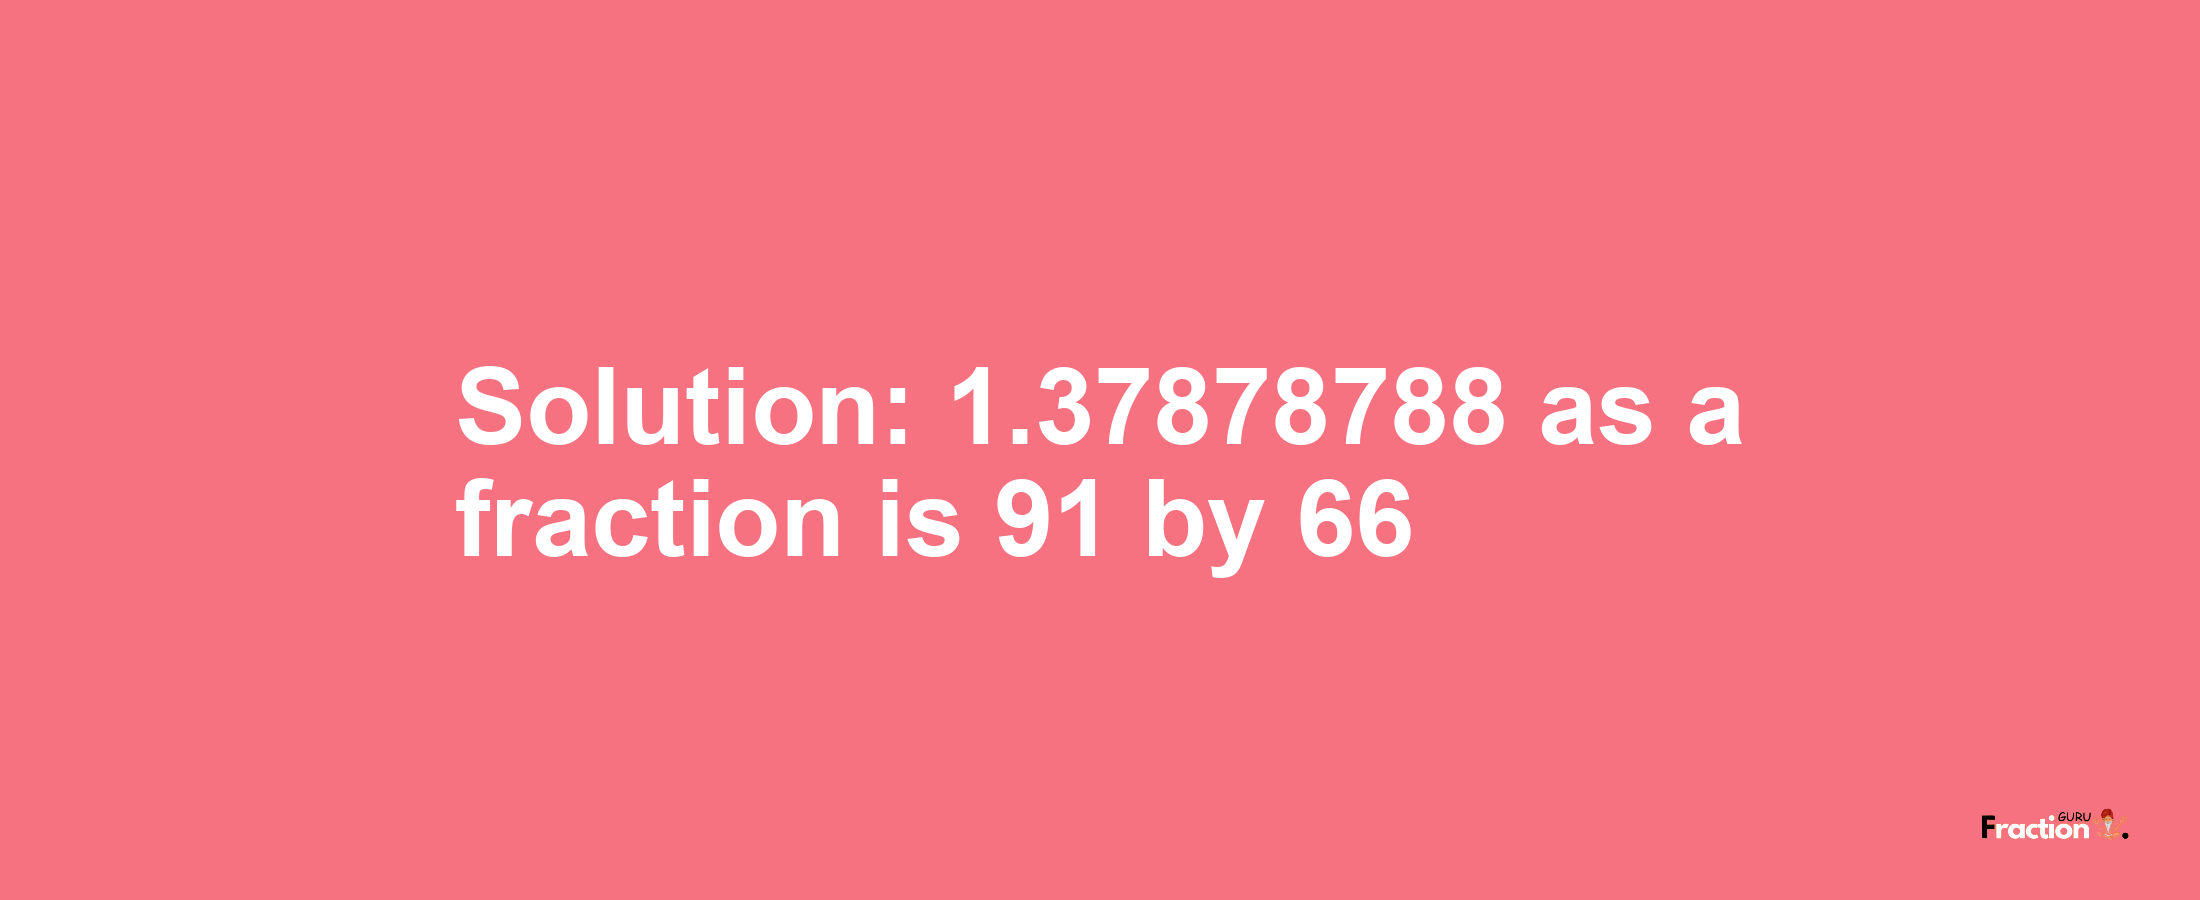 Solution:1.37878788 as a fraction is 91/66